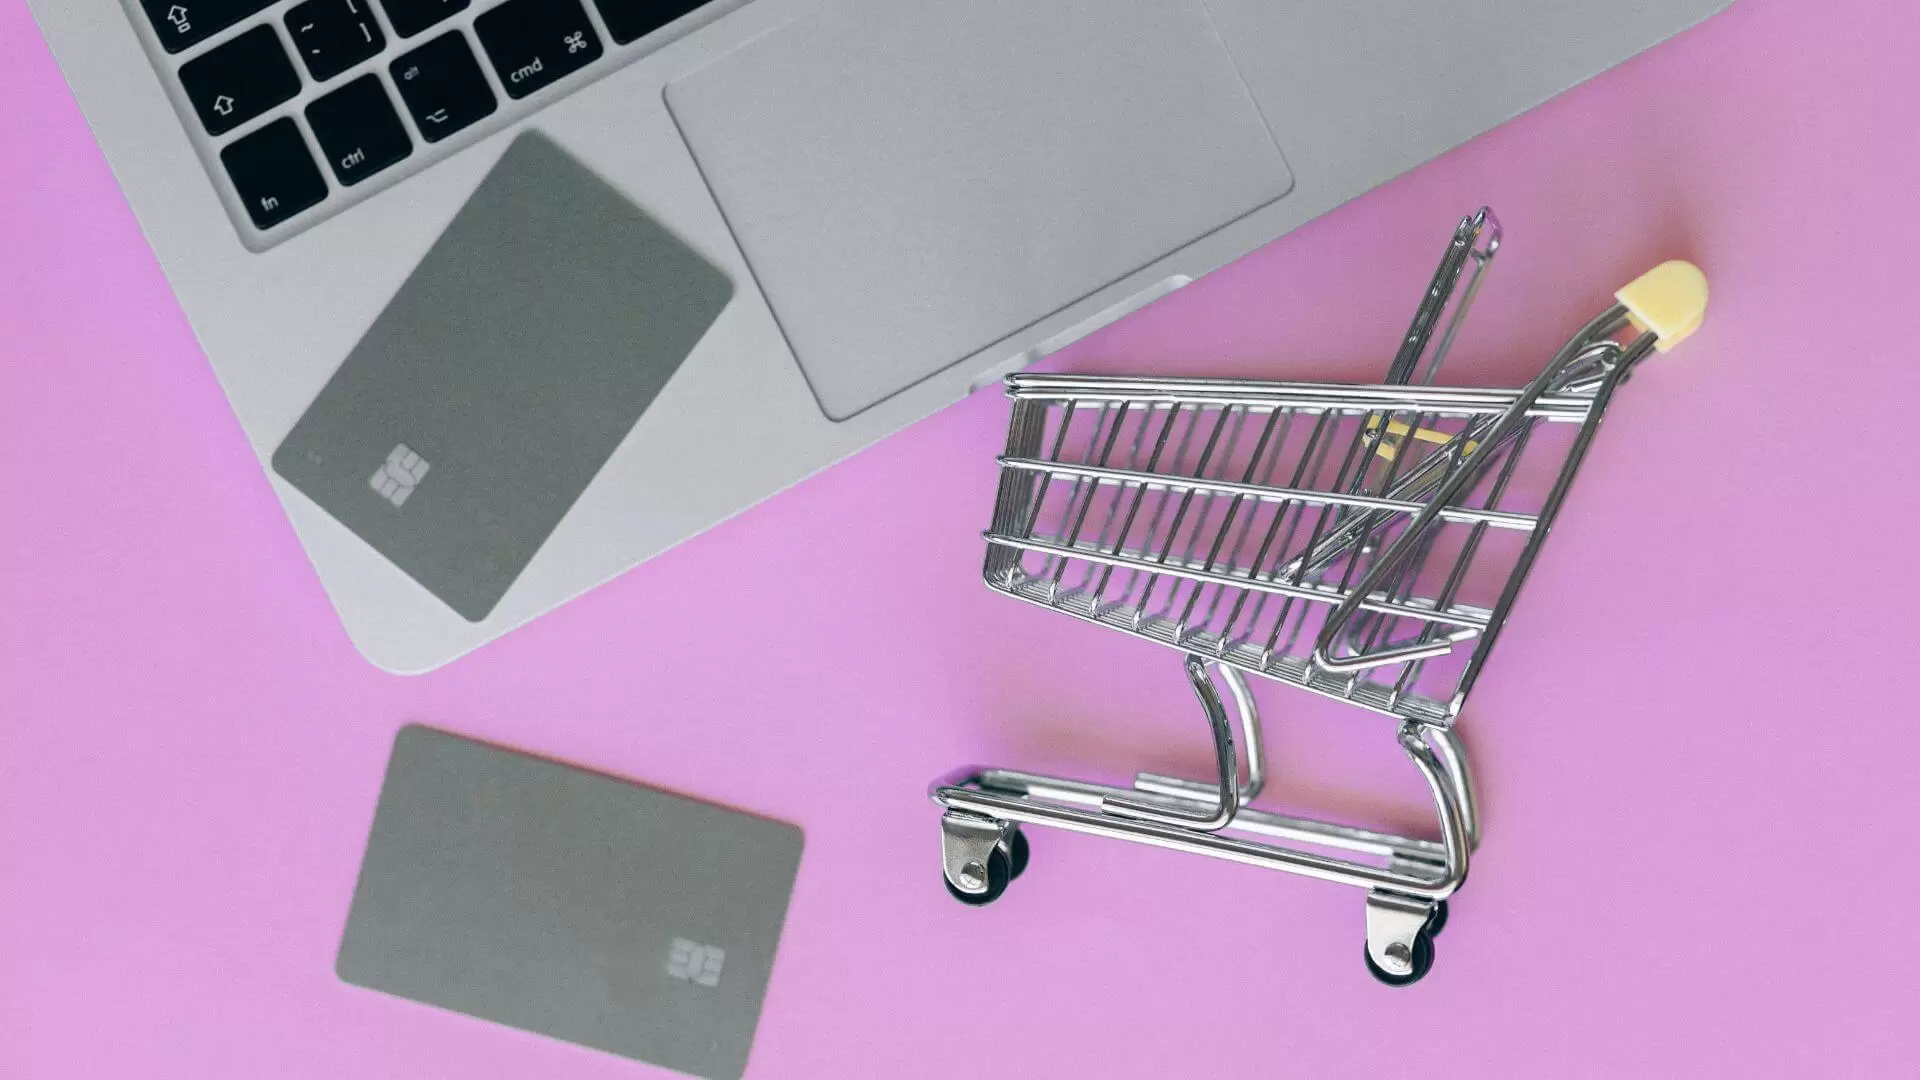 We Talk About Usability The Shopping Cart And Payment Options (1)